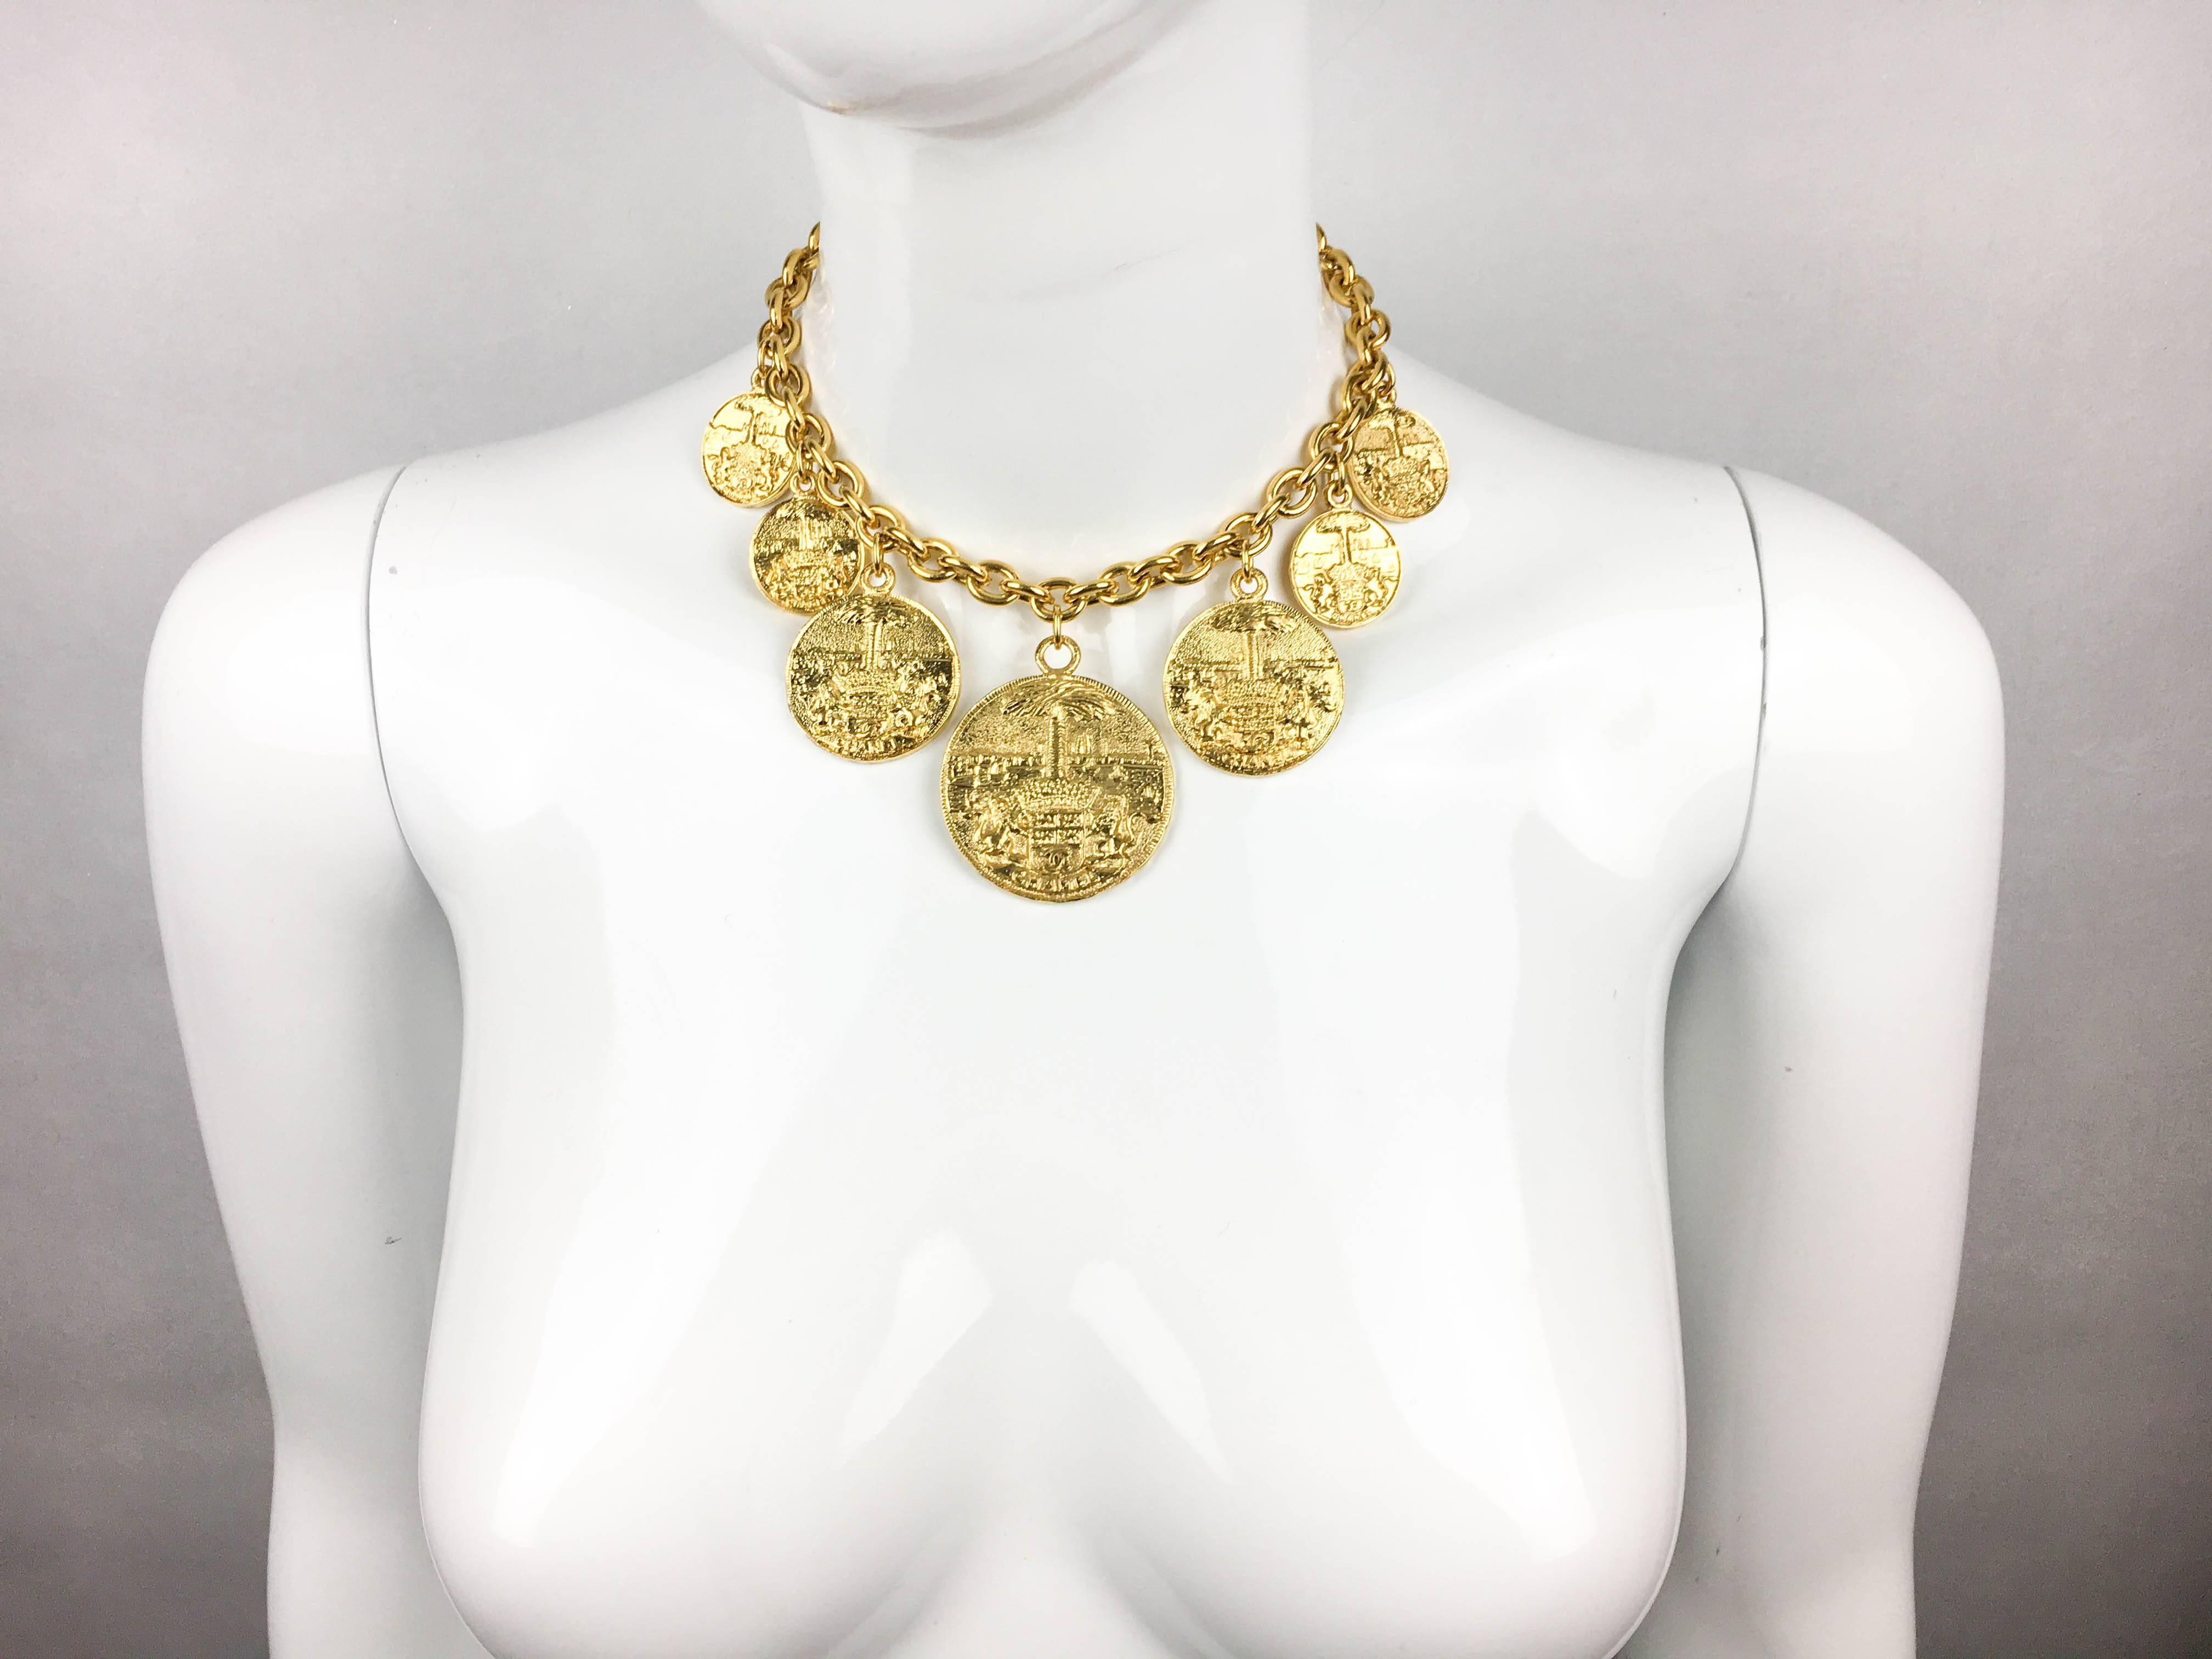 Vintage Chanel Gilt Medallion Choker Necklace. This beautiful Chanel necklace dates back from the 1980’s. It comprises of a chain with 7 medallions hanging from it. They feature a seal and landscape design and are graduated in size, with the largest